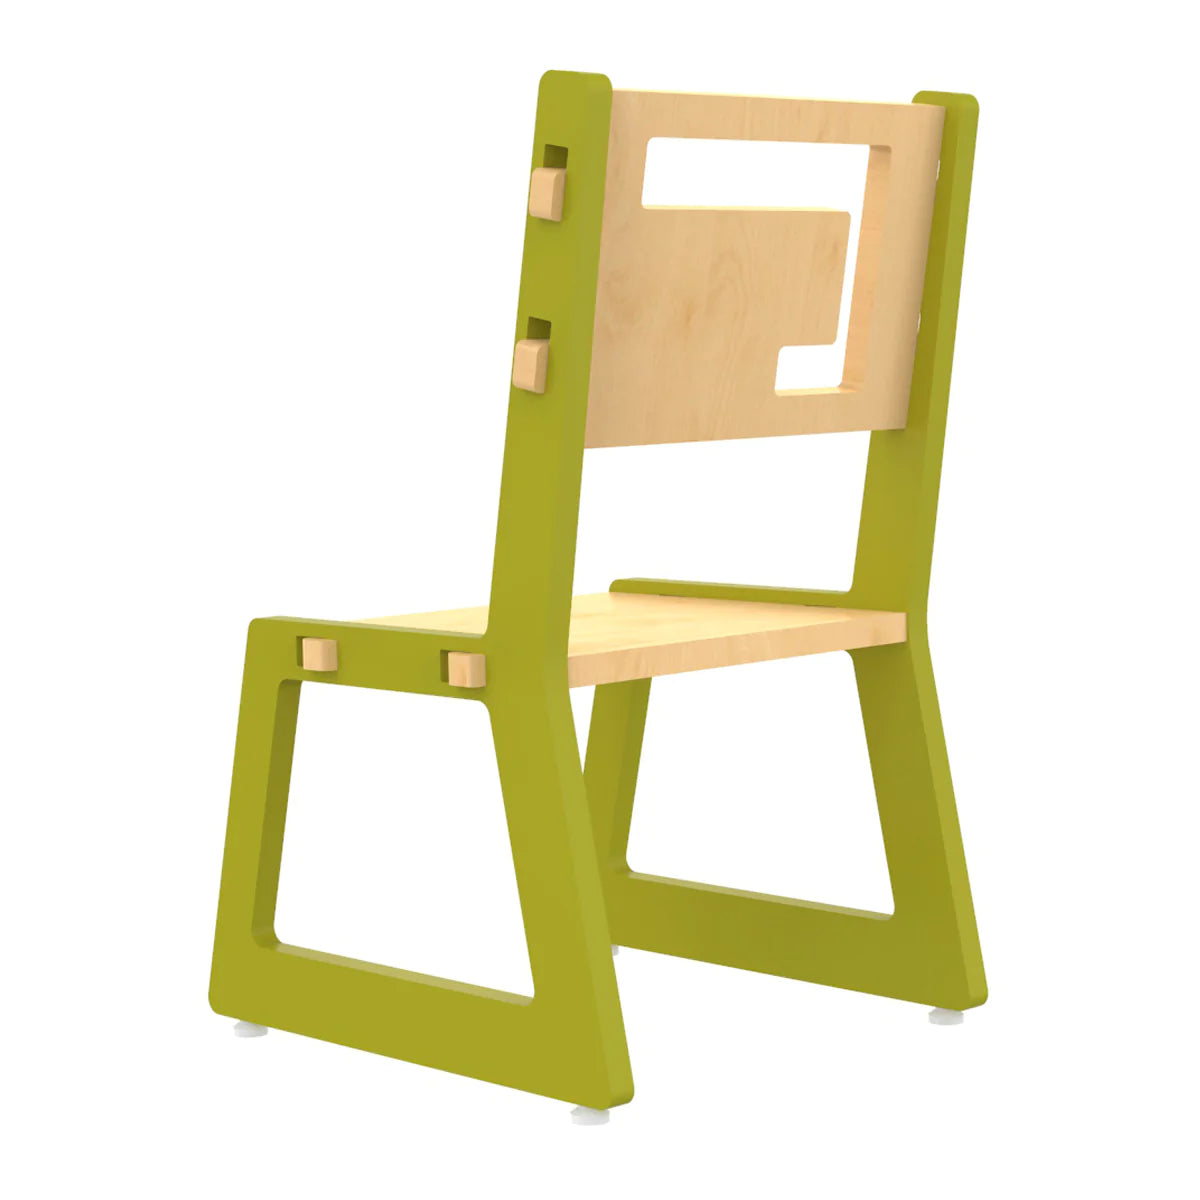 Buy Blue Apple Wooden Chair - Green - Back View - SkilloToys.com